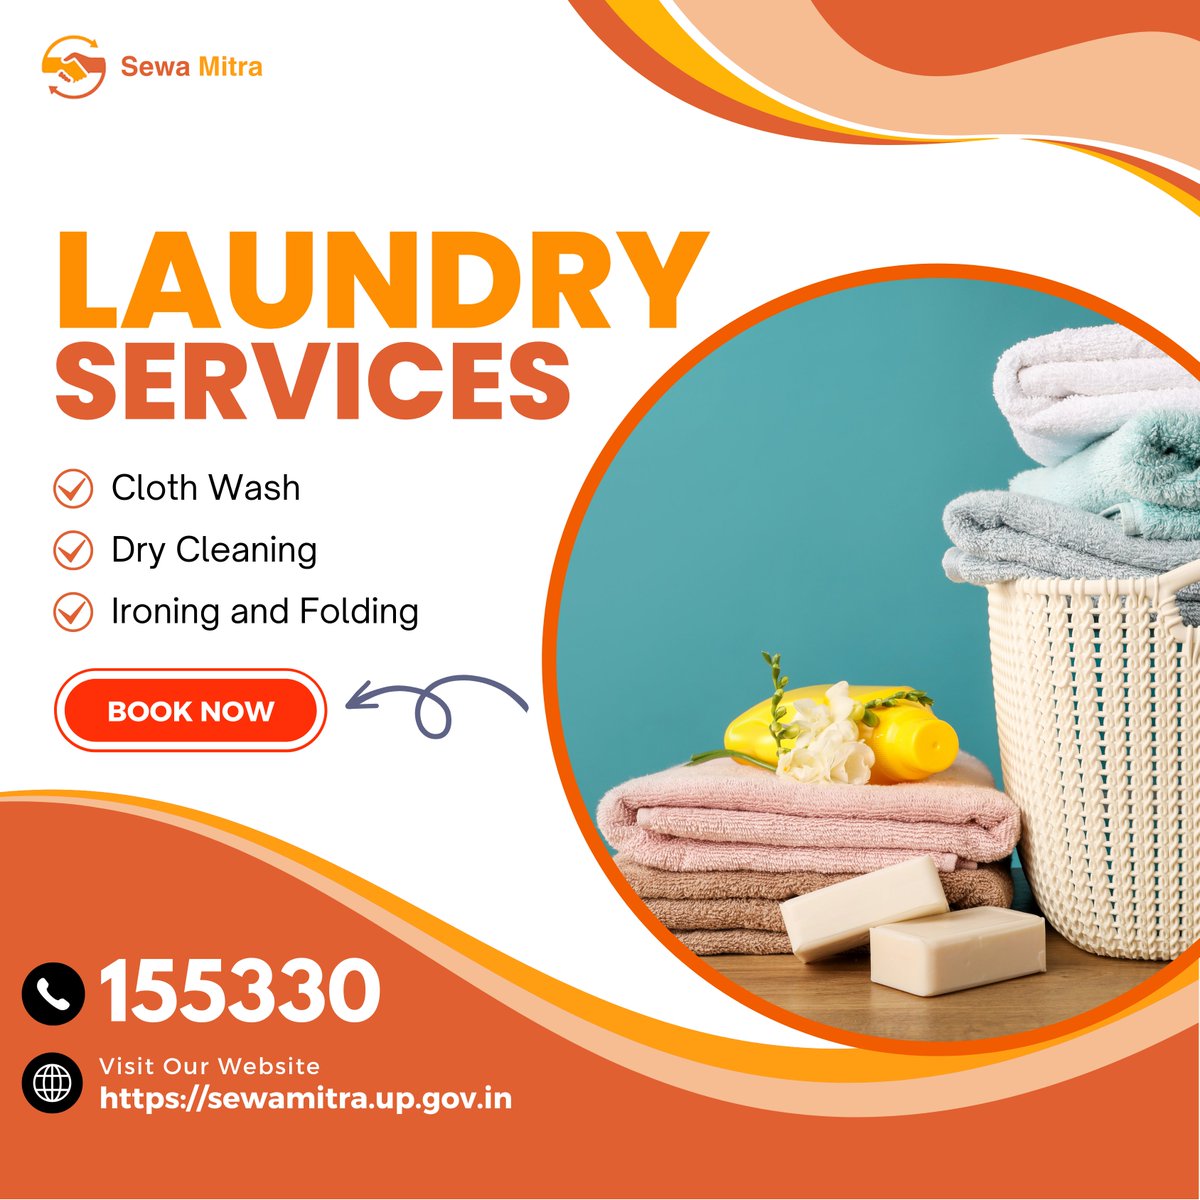 Looking for Laundry Services Call us now 155330

#Laundry #laundryservice #laundryservices #laundrytime #service #services #sewamitra #sewamitraapp #sewamitraportal #earthquake #Ayodhya #Infosys #MilePhakphum #sewamitraservices #callnow #callnow📞 #callnow☎️📞 #ʙᴏᴏᴋɴᴏᴡ